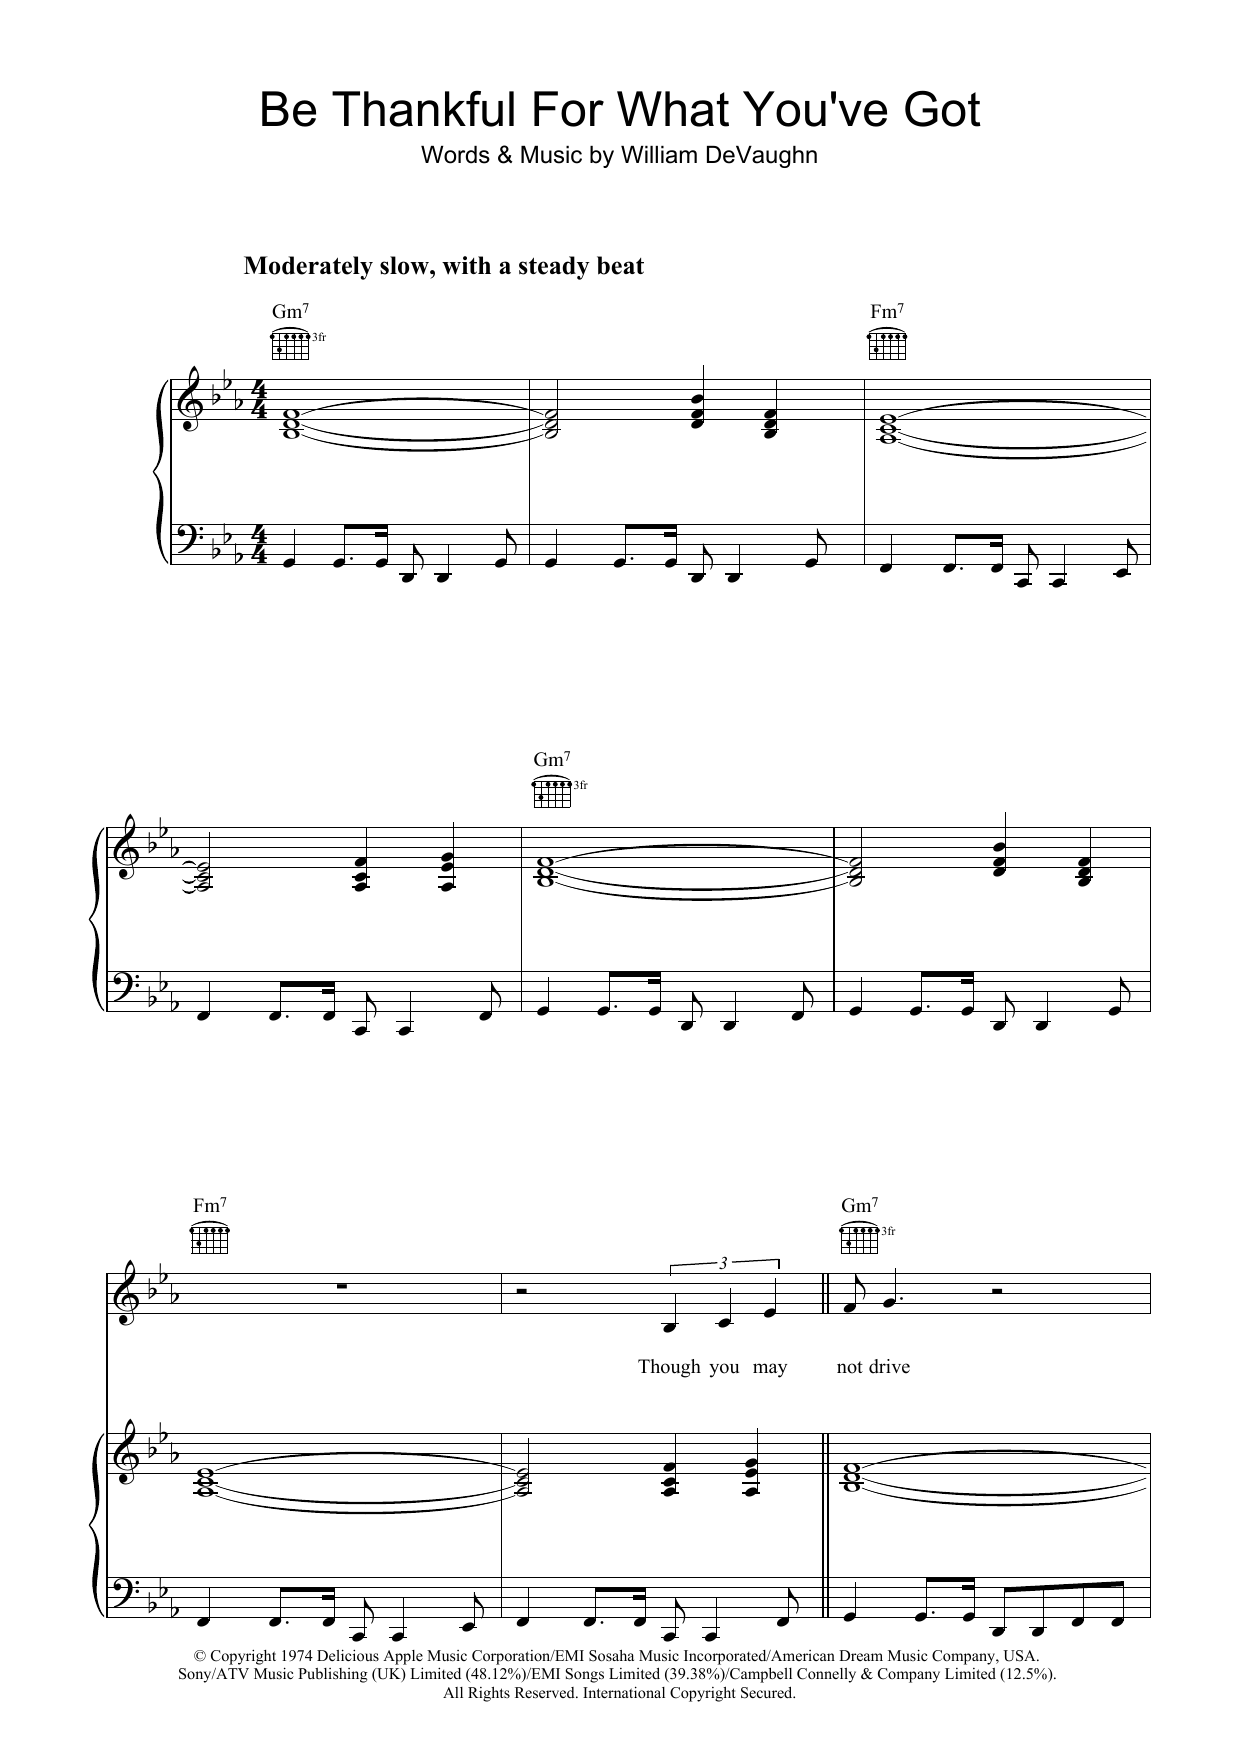 Download William DeVaughan Be Thankful For What You Got Sheet Music